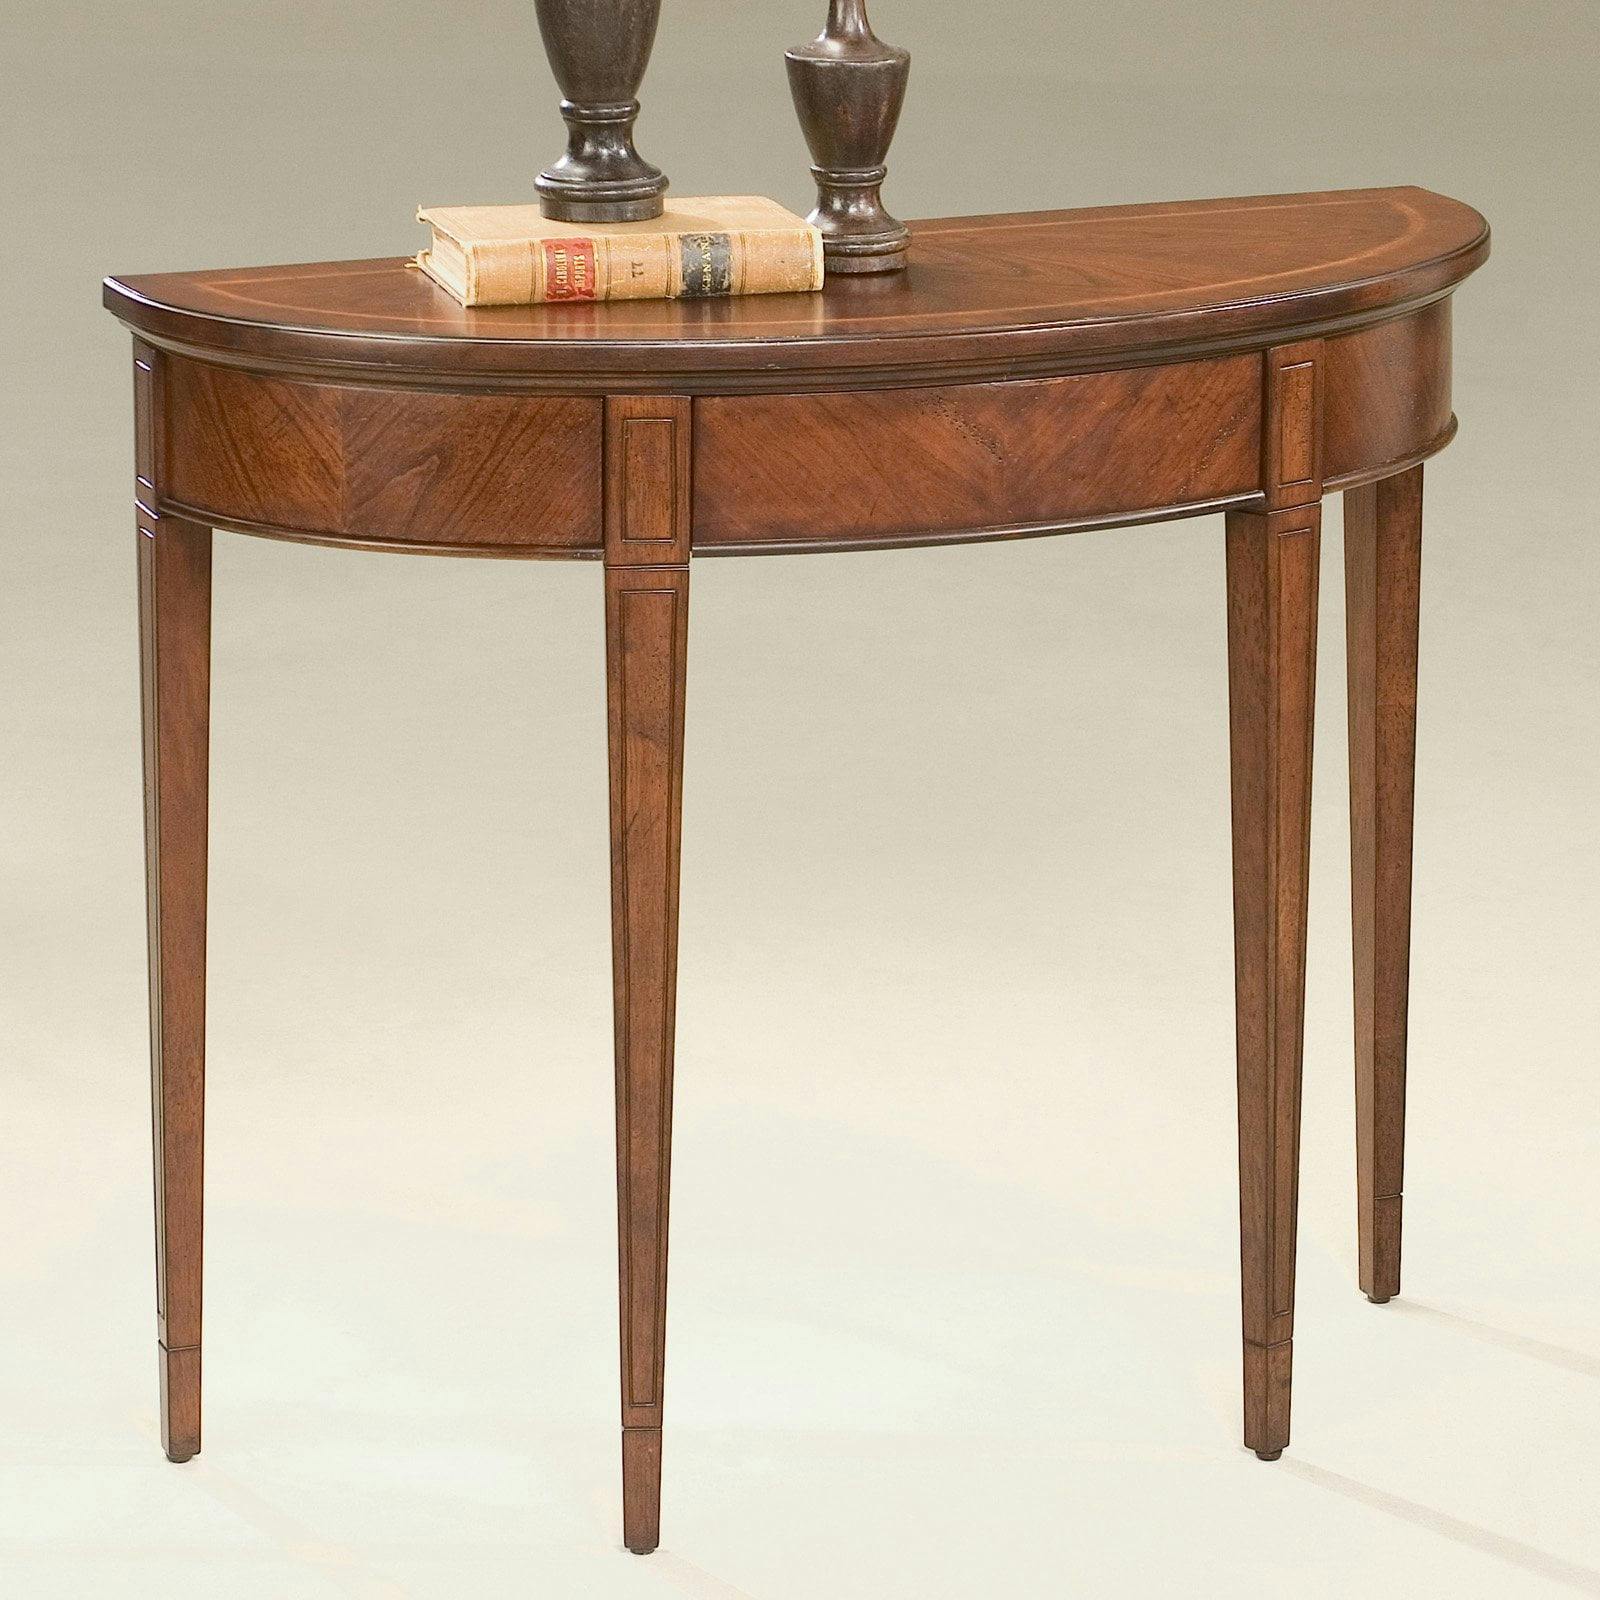 Elegant Plantation Cherry Demilune Console Table with Carved Details